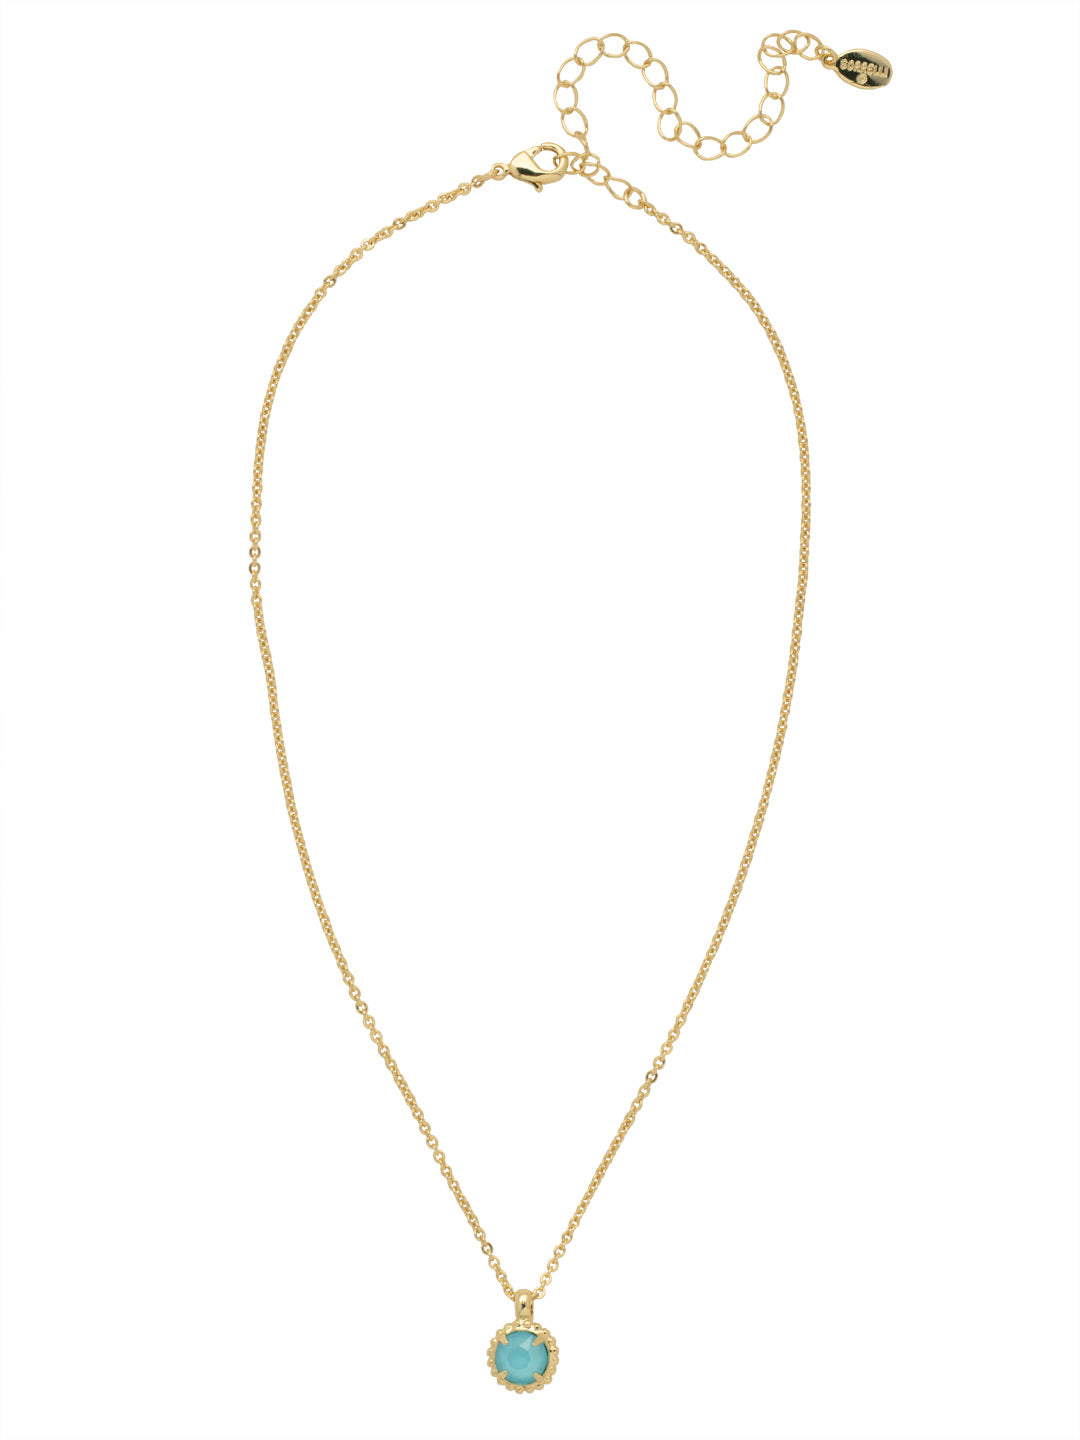 Simplicity Pendant Necklace - NBY38BGHBR - <p>Perfect for any day! The Simplicity Pendant Necklace features a round cut crystal with vintage edging. From Sorrelli's Happy Birthday Redux collection in our Bright Gold-tone finish.</p>